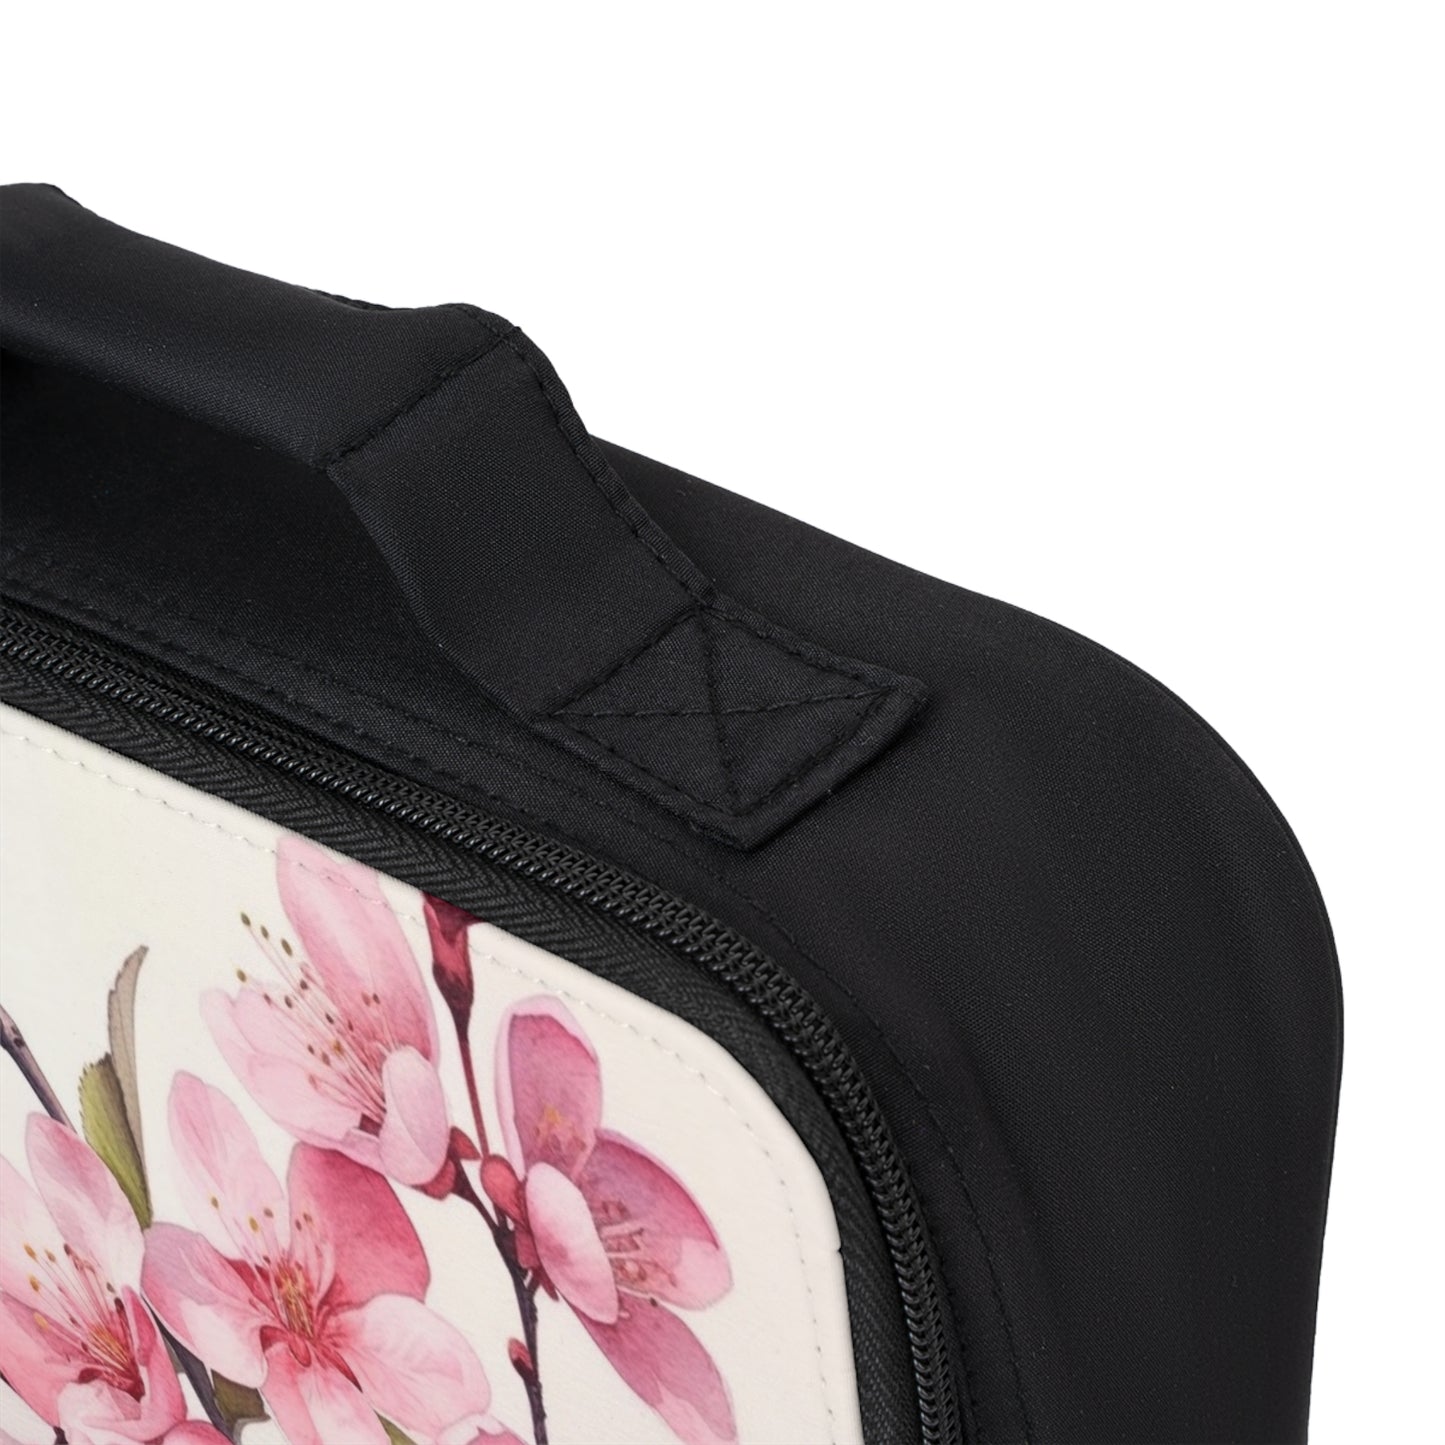 Artistic Flourish: Floral Watercolor Cherry Blossom Lunch Bag